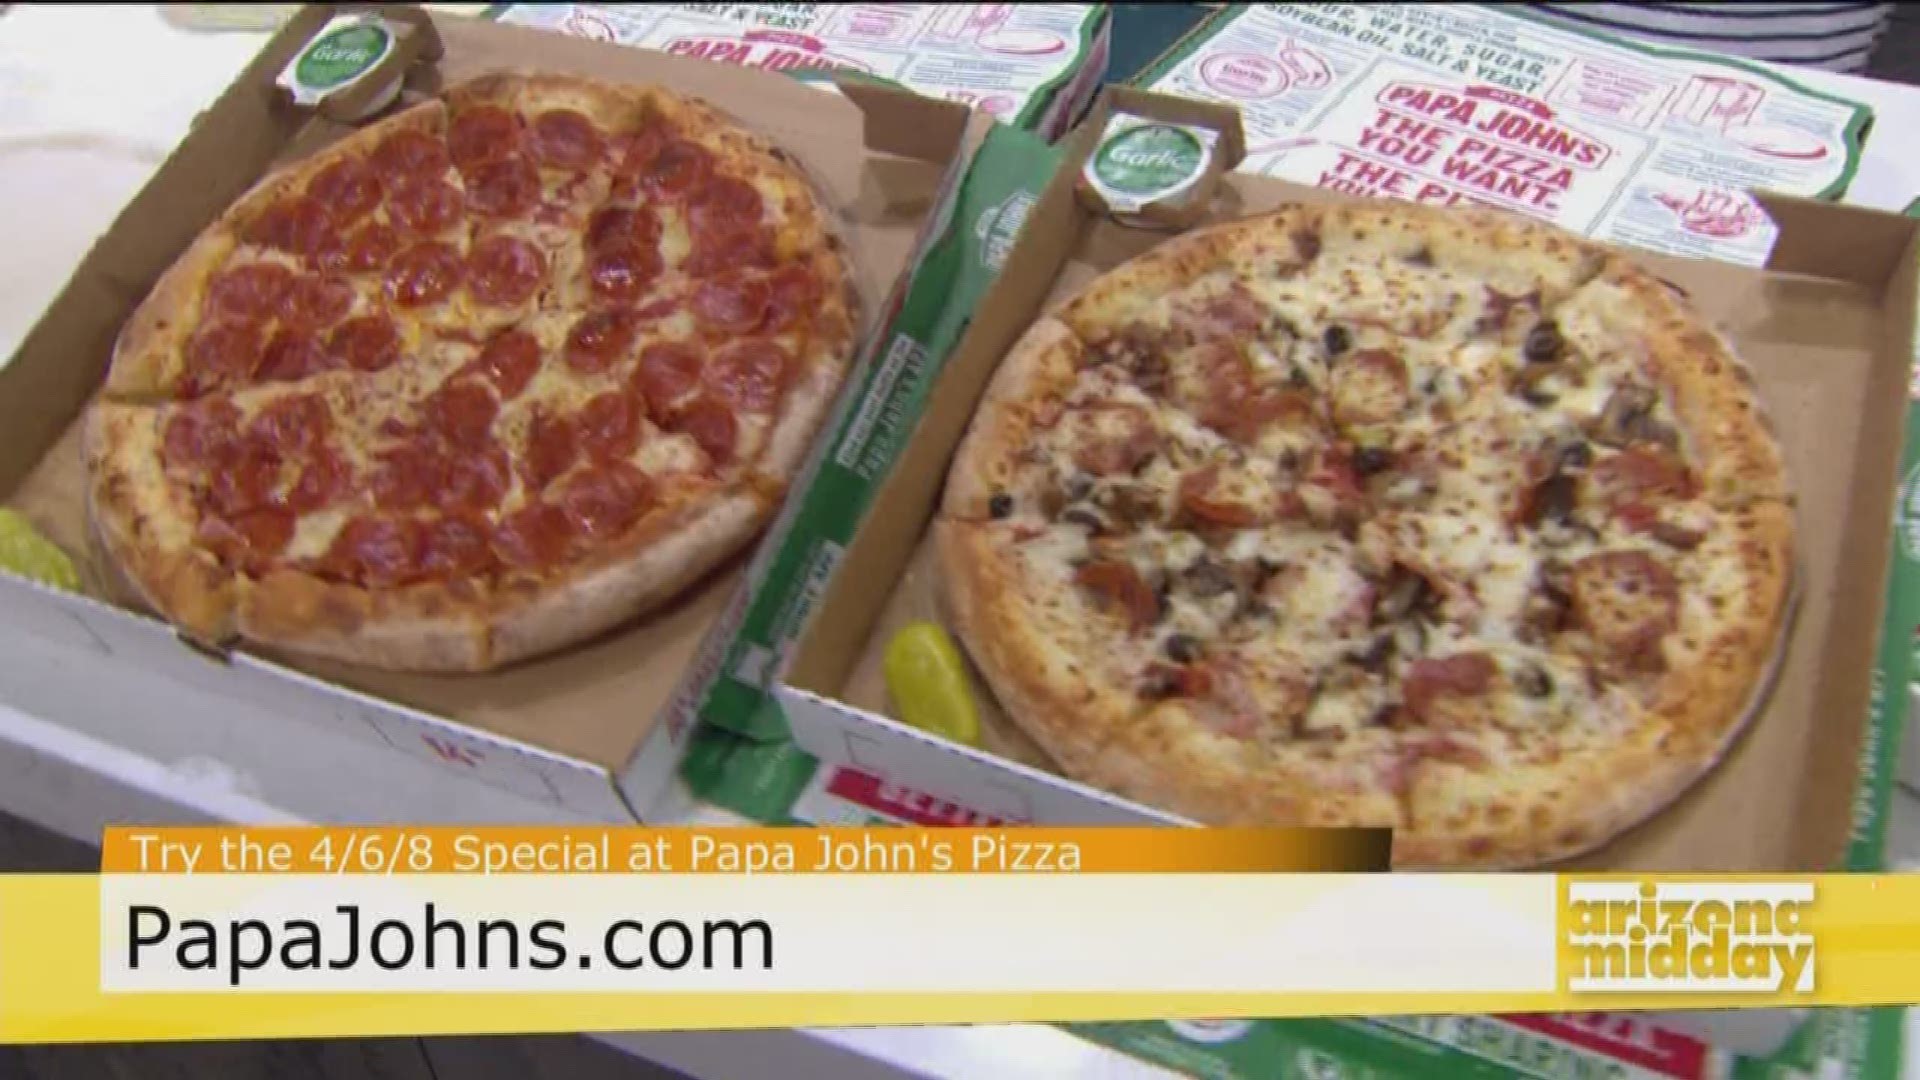 Lance Stafko, Jessi Rutledge, and Tye Rutledge fill us in on their locally owned and operated Papa John's Pizza stores and their special Cardinals football deals